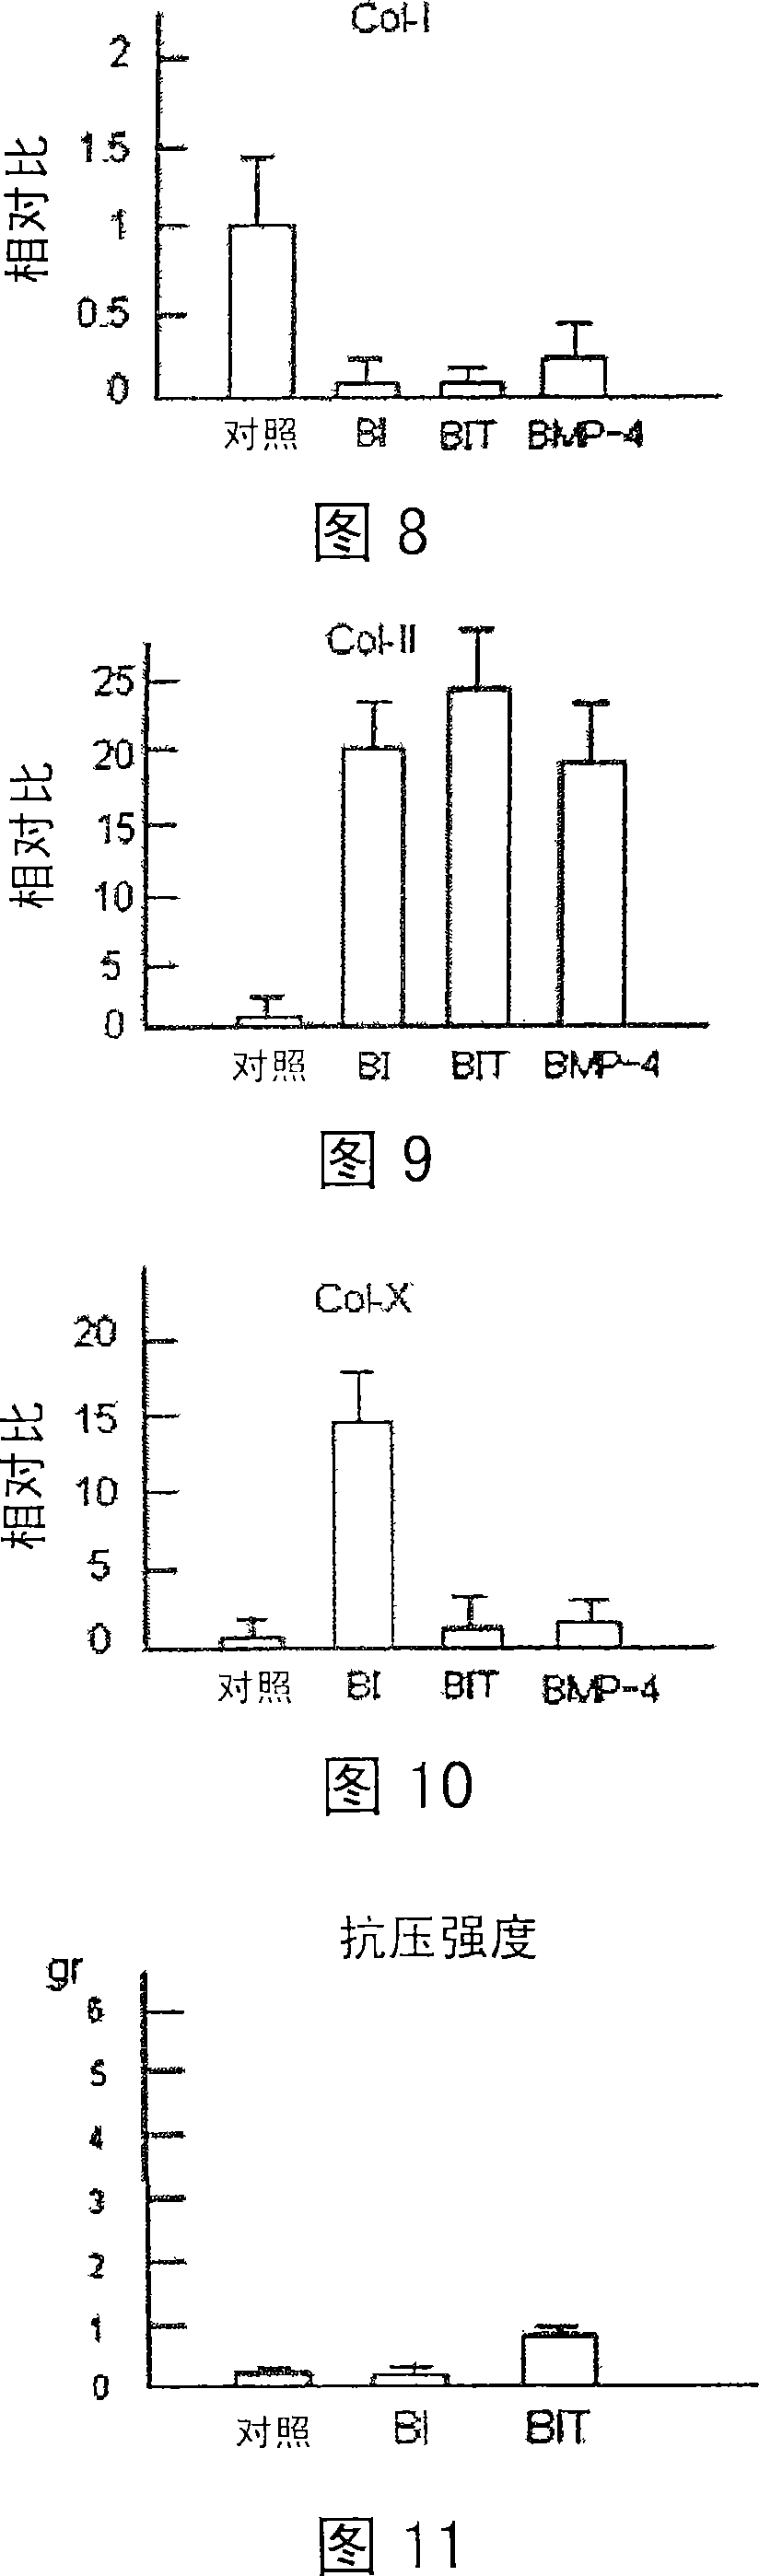 Medium for the redifferentiation of dedifferentiated chondrocytes into chondrocytes